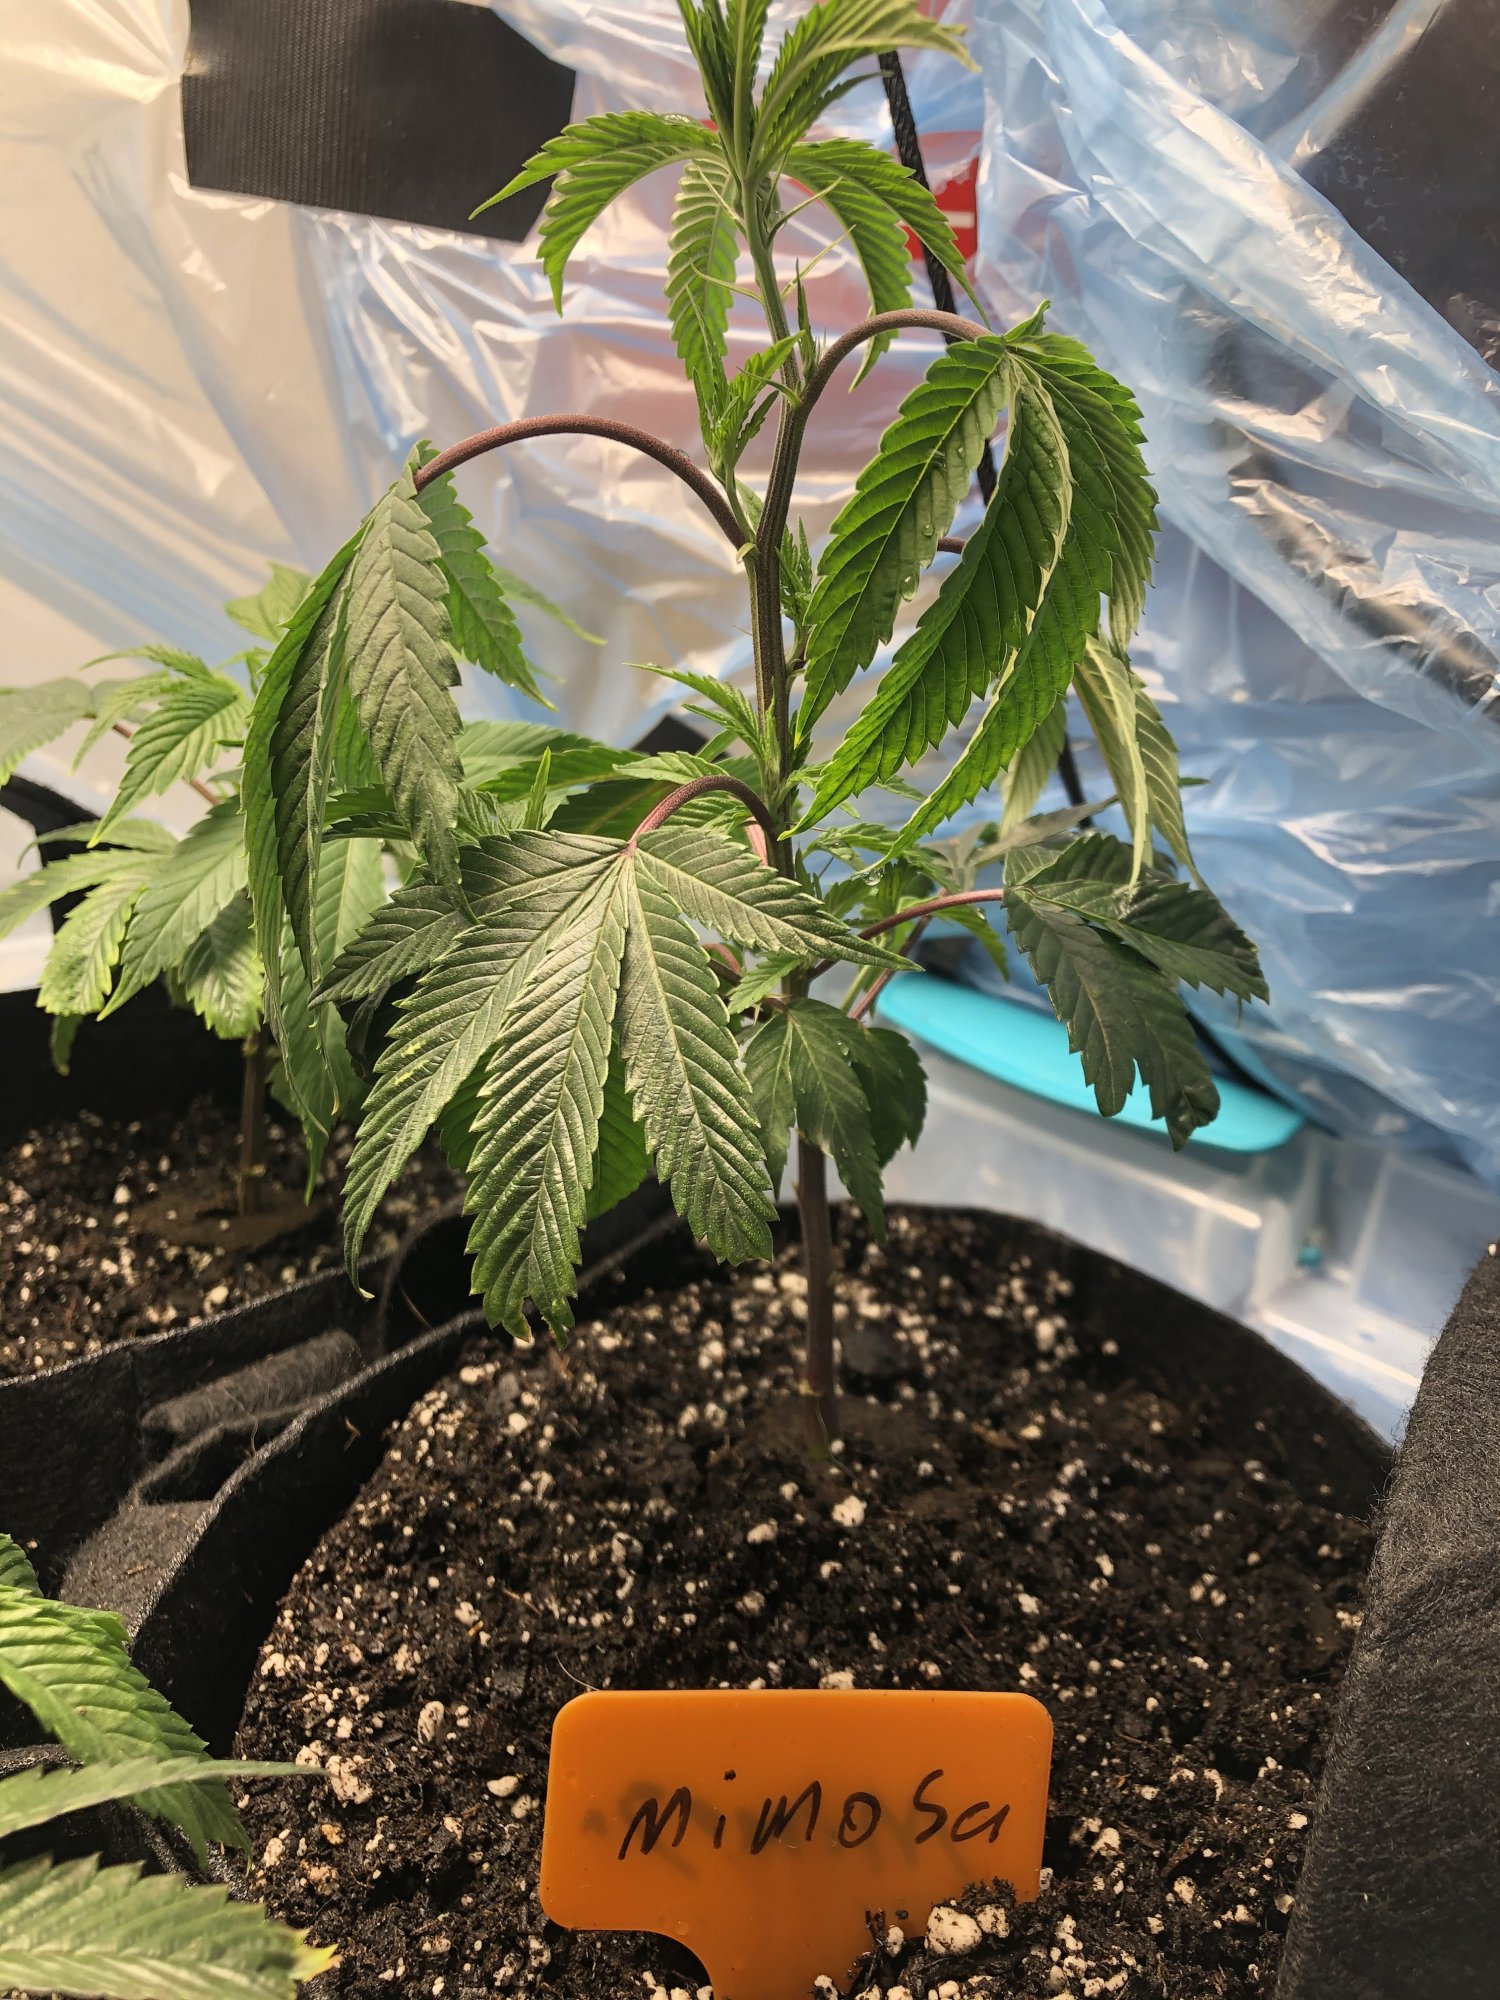 Clone drooping after transplant